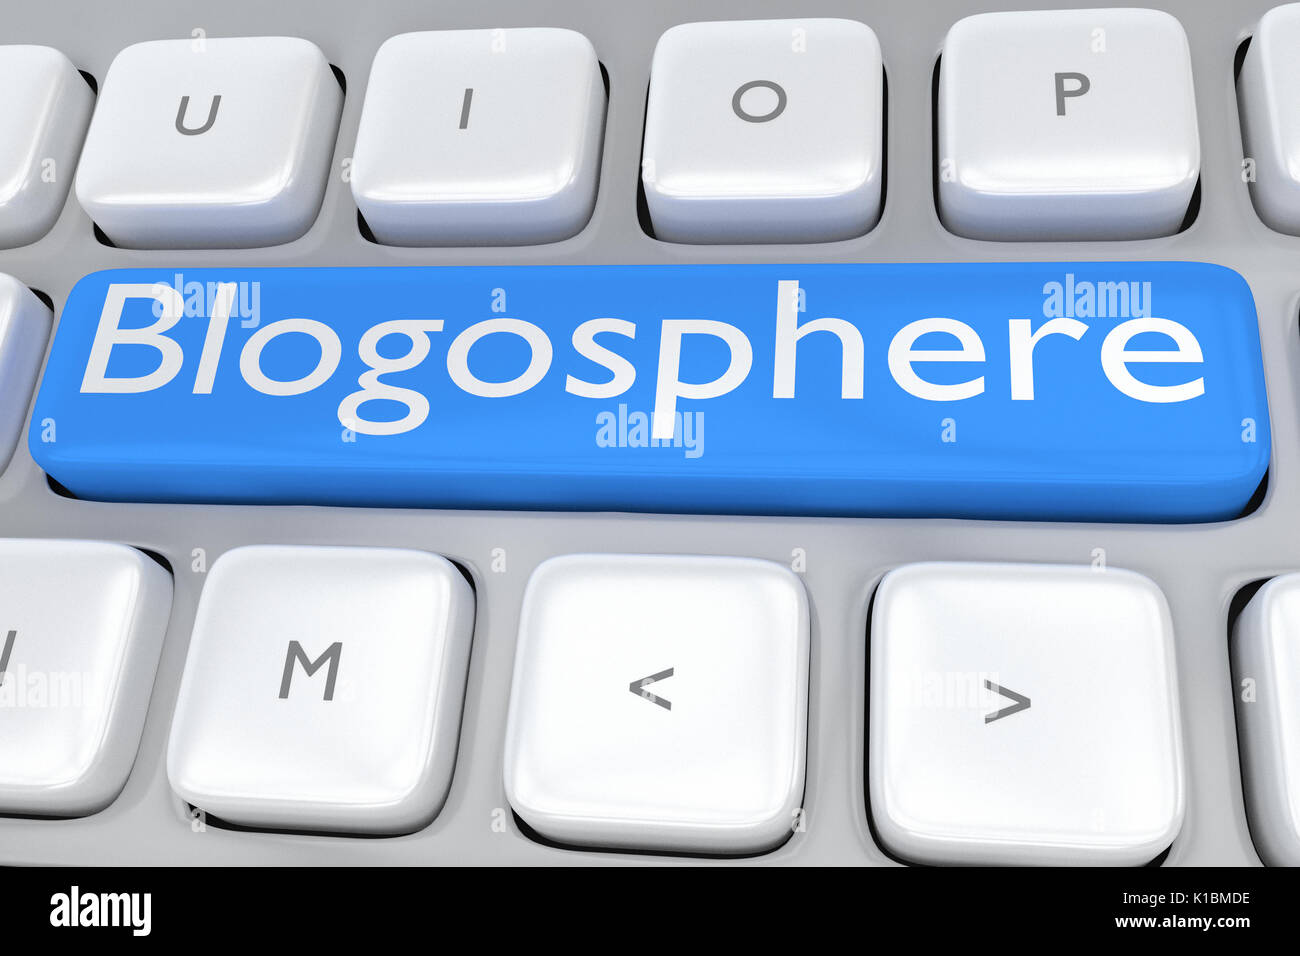 Render illustration of computer keyboard with the print Blogosphere on a pale blue button Stock Photo